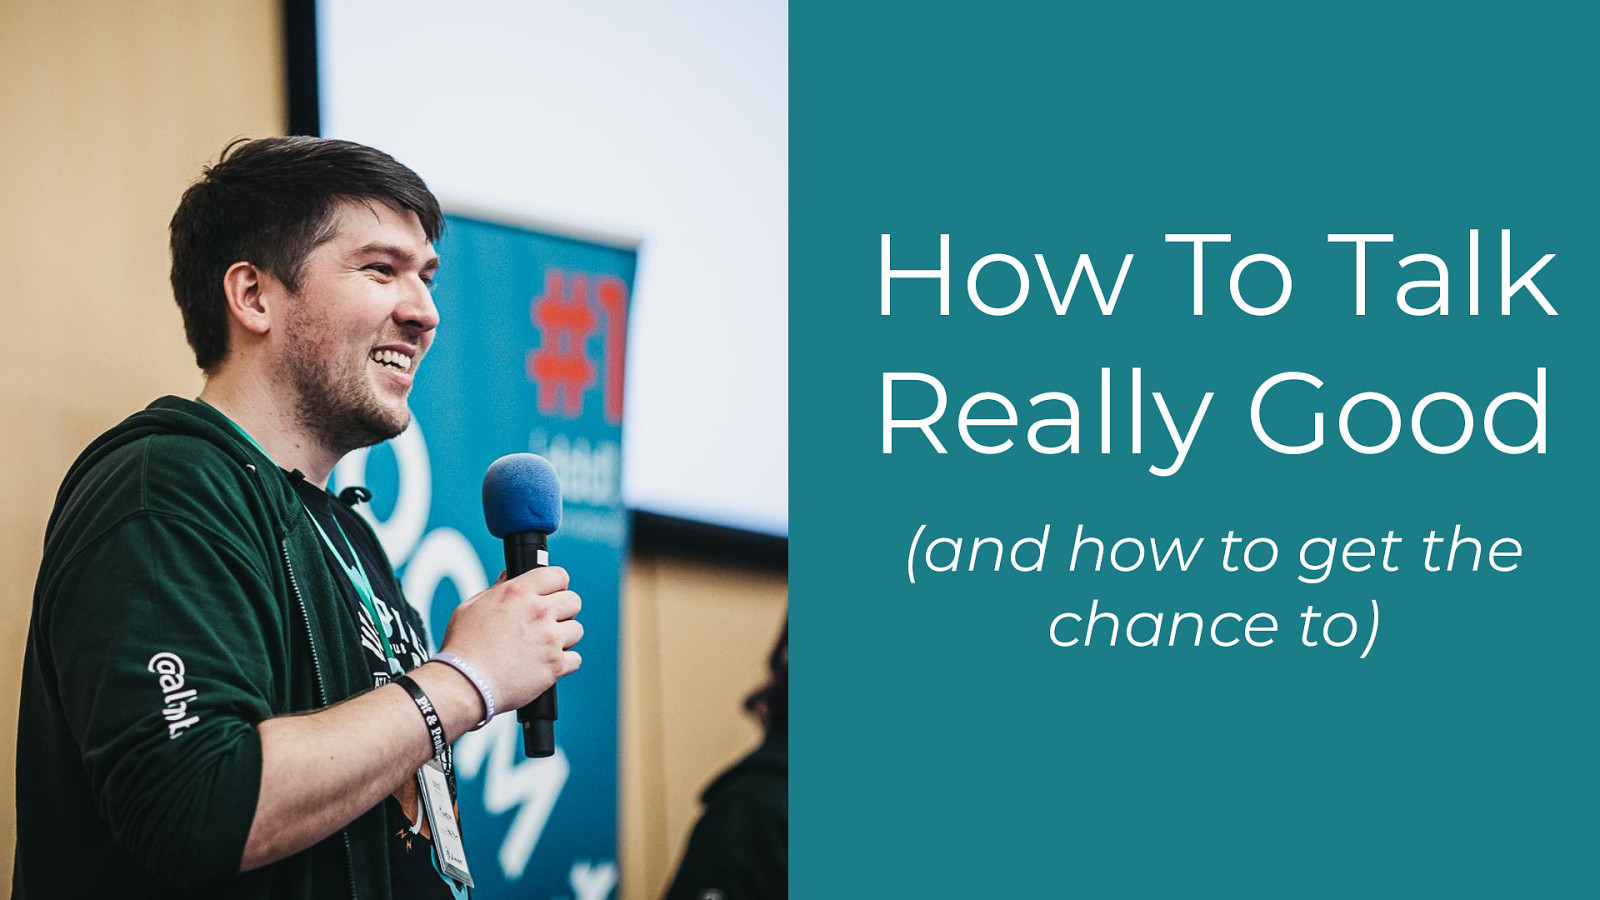 How To Talk Really Good (and how to get the chance to)